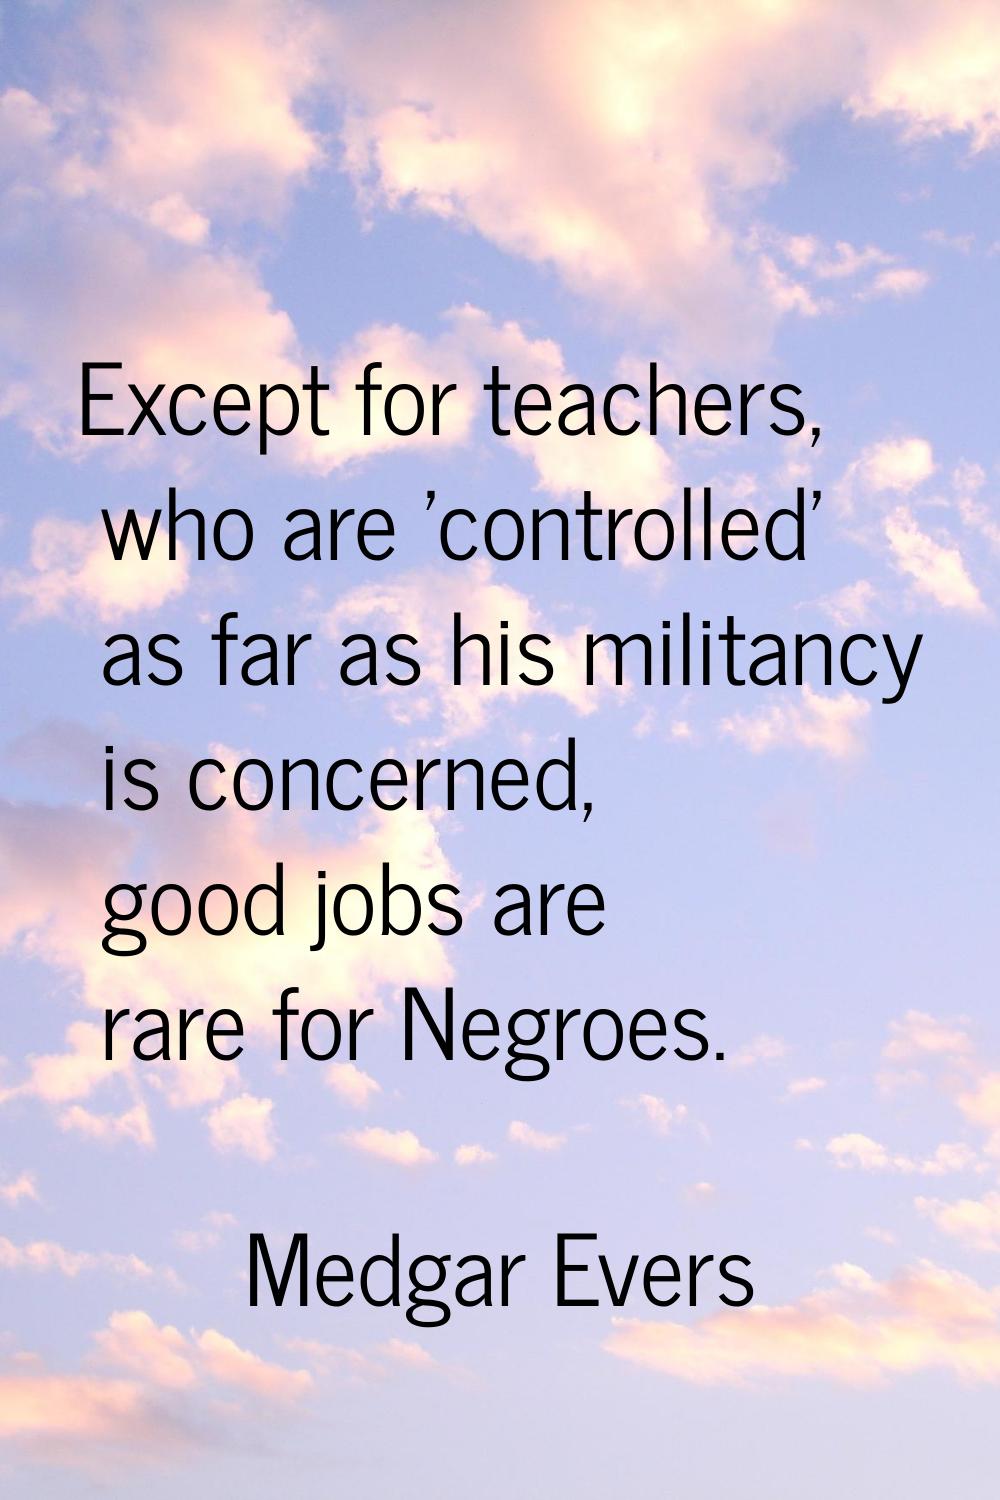 Except for teachers, who are 'controlled' as far as his militancy is concerned, good jobs are rare 